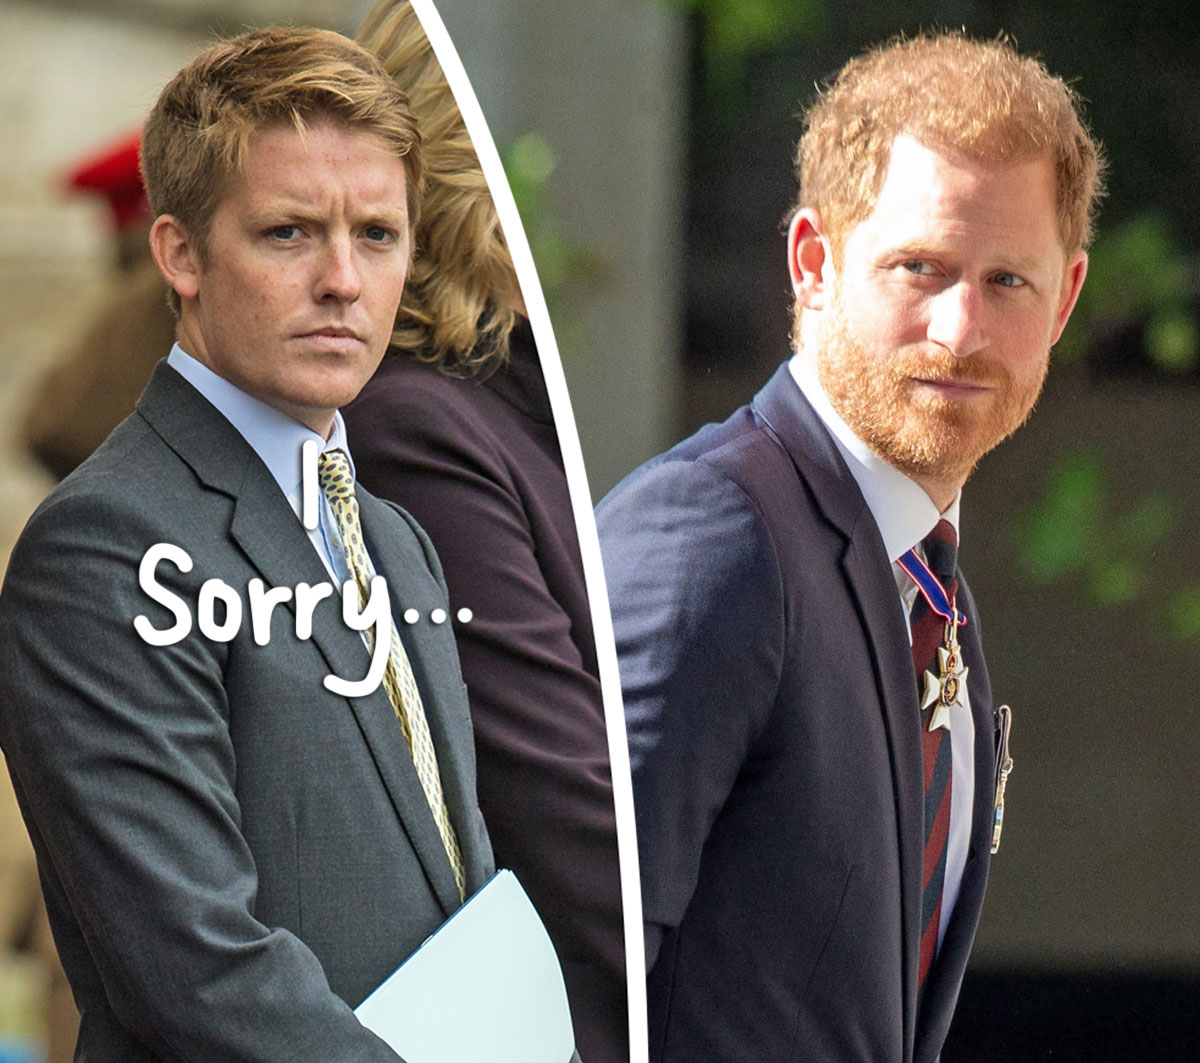 #Prince Harry Uninvited From Lifelong Friend’s Wedding In ‘Awkward Phone Call’: REPORT